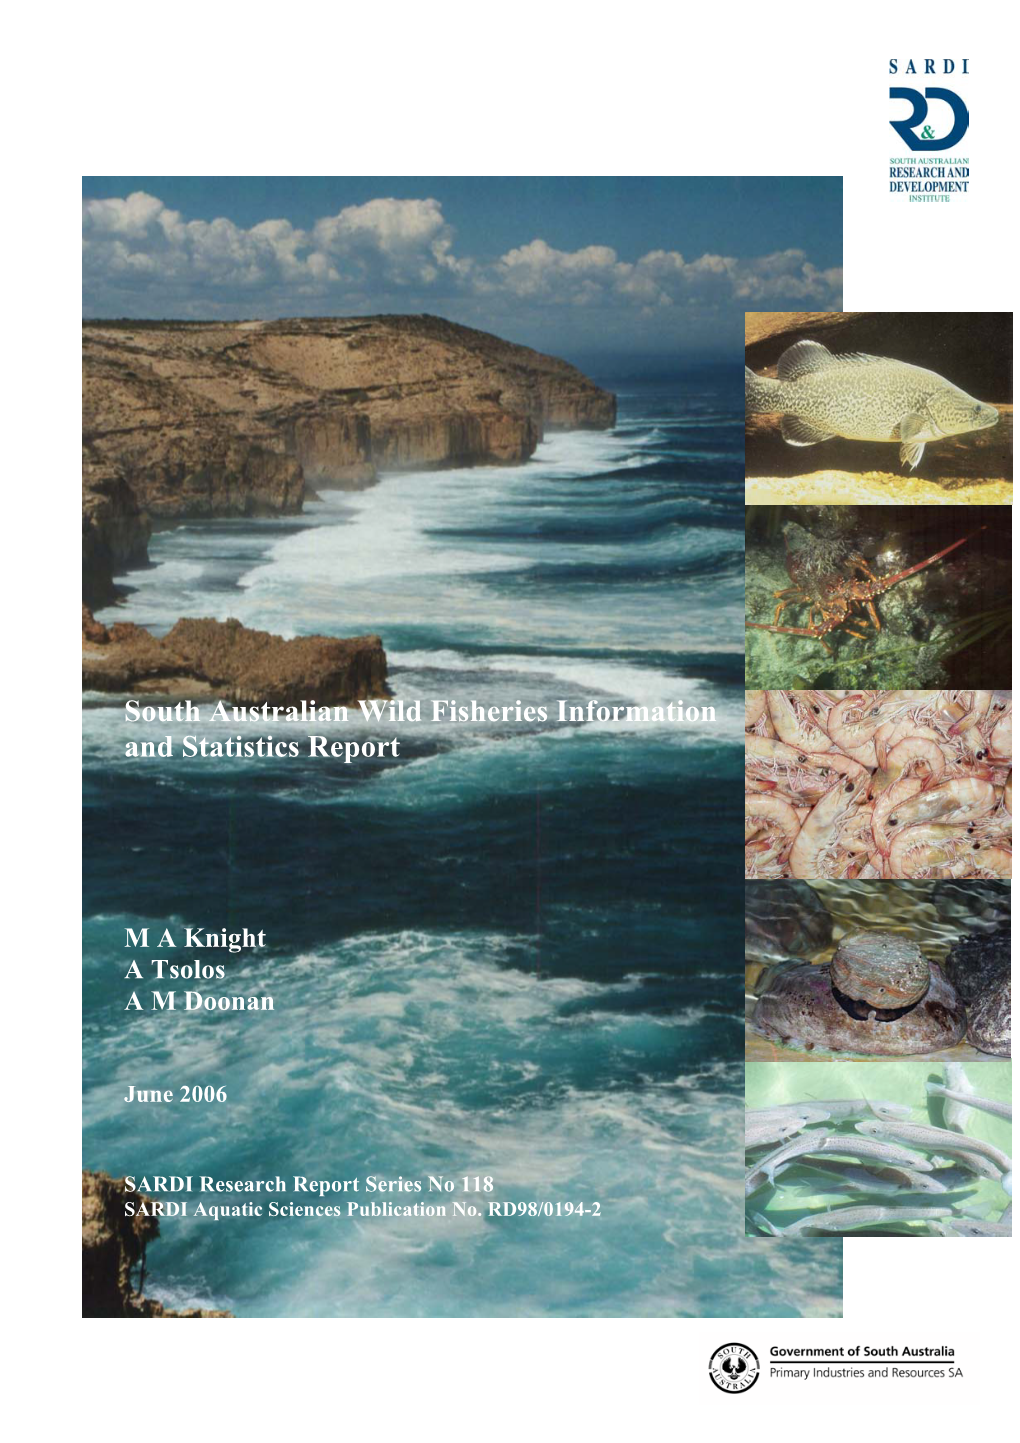 South Australian Wild Fisheries Information and Statistics Report